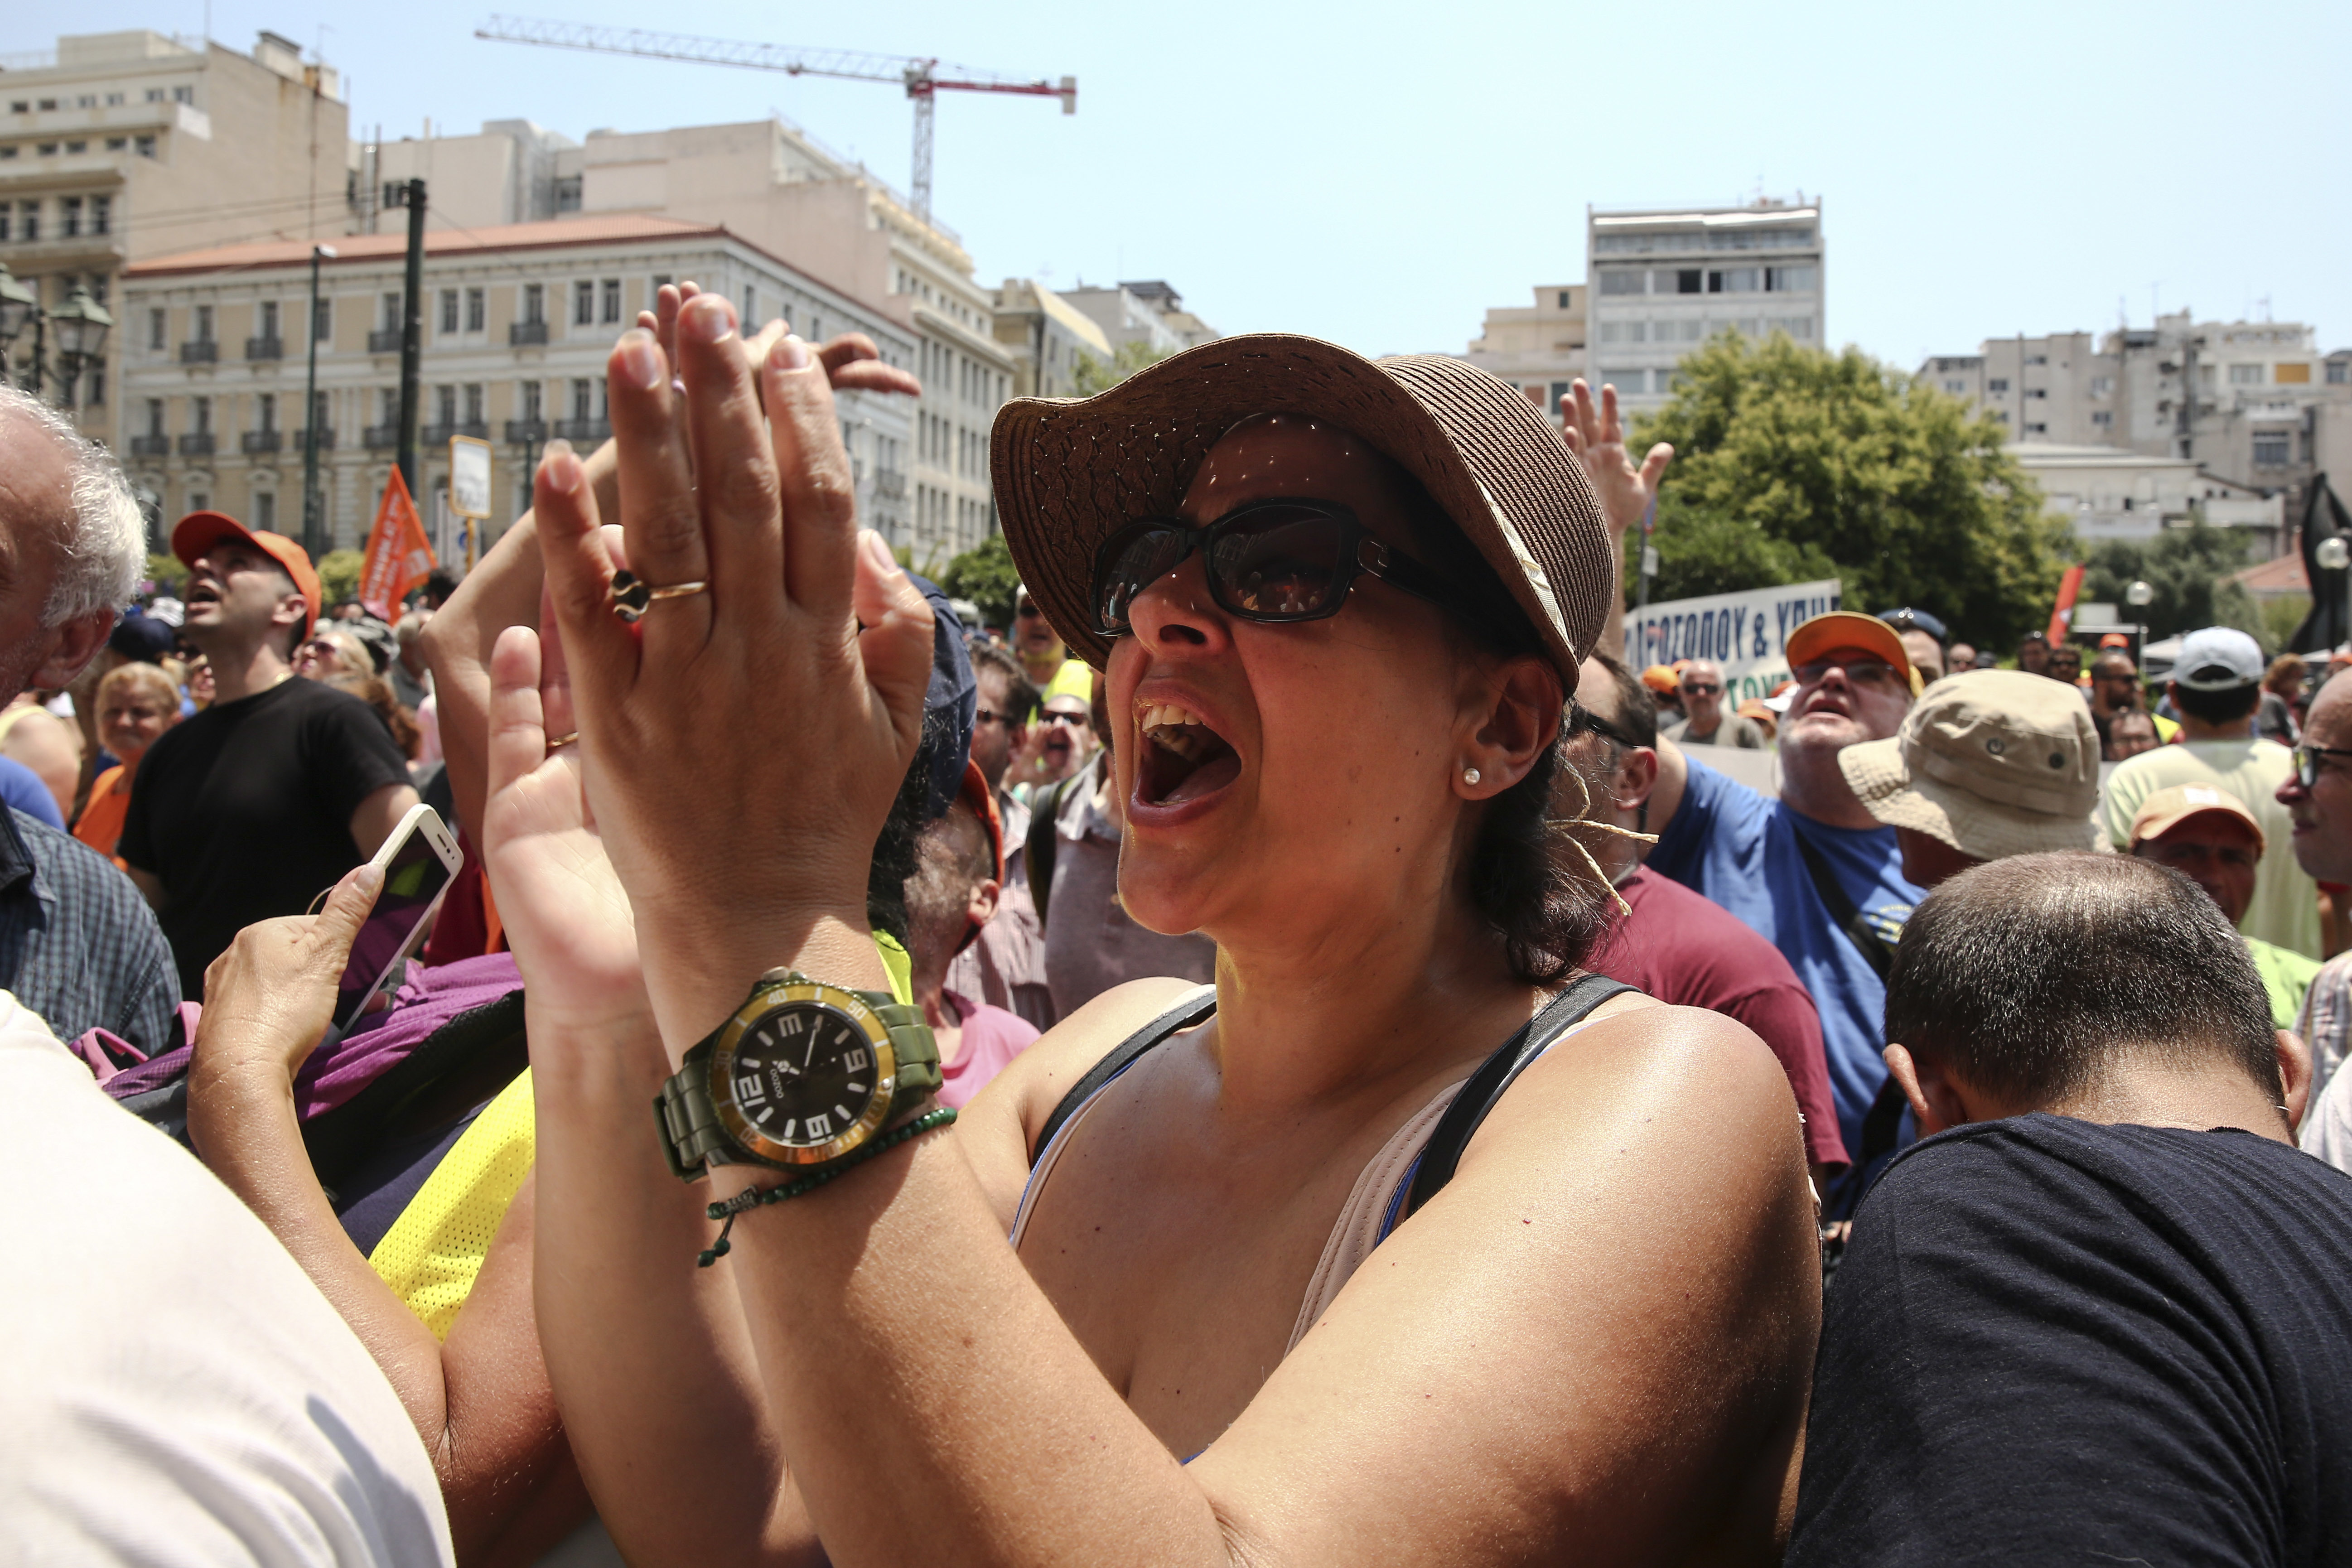 A protester chants slogans during a rally outside the Interior Ministry in Athens, on Monday, June 26, 2017. With a heat wave expected later this week, Greece's government Monday urging striking garbage collectors to return to work after a 10-day protest has left huge piles of trash around Athens. (AP Photo/Yorgos Karahalis)